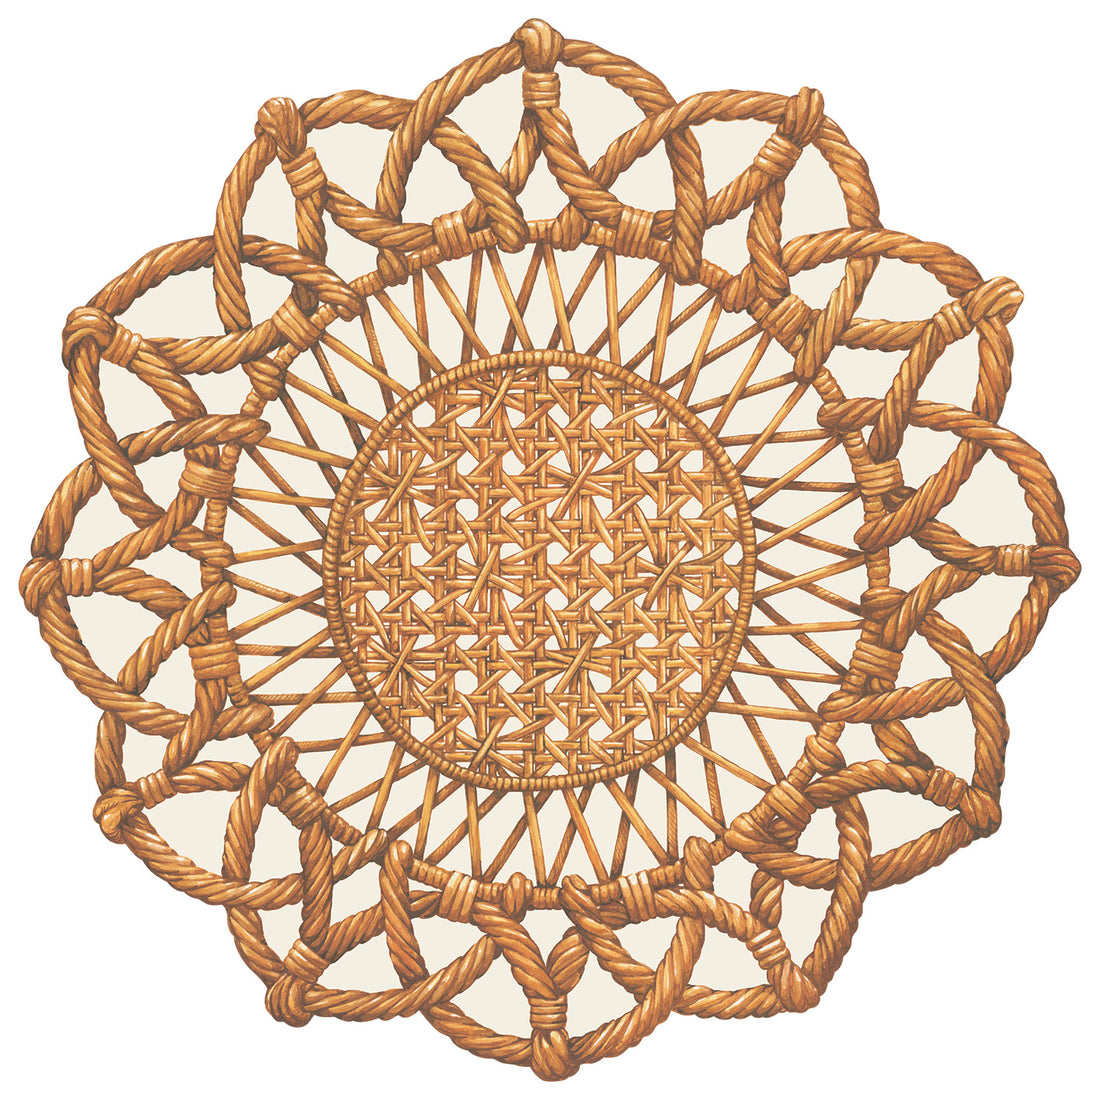 A Die-cut Rattan Weave Placemat with a circular design, made with a rattan weave placemat, from Hester &amp; Cook.